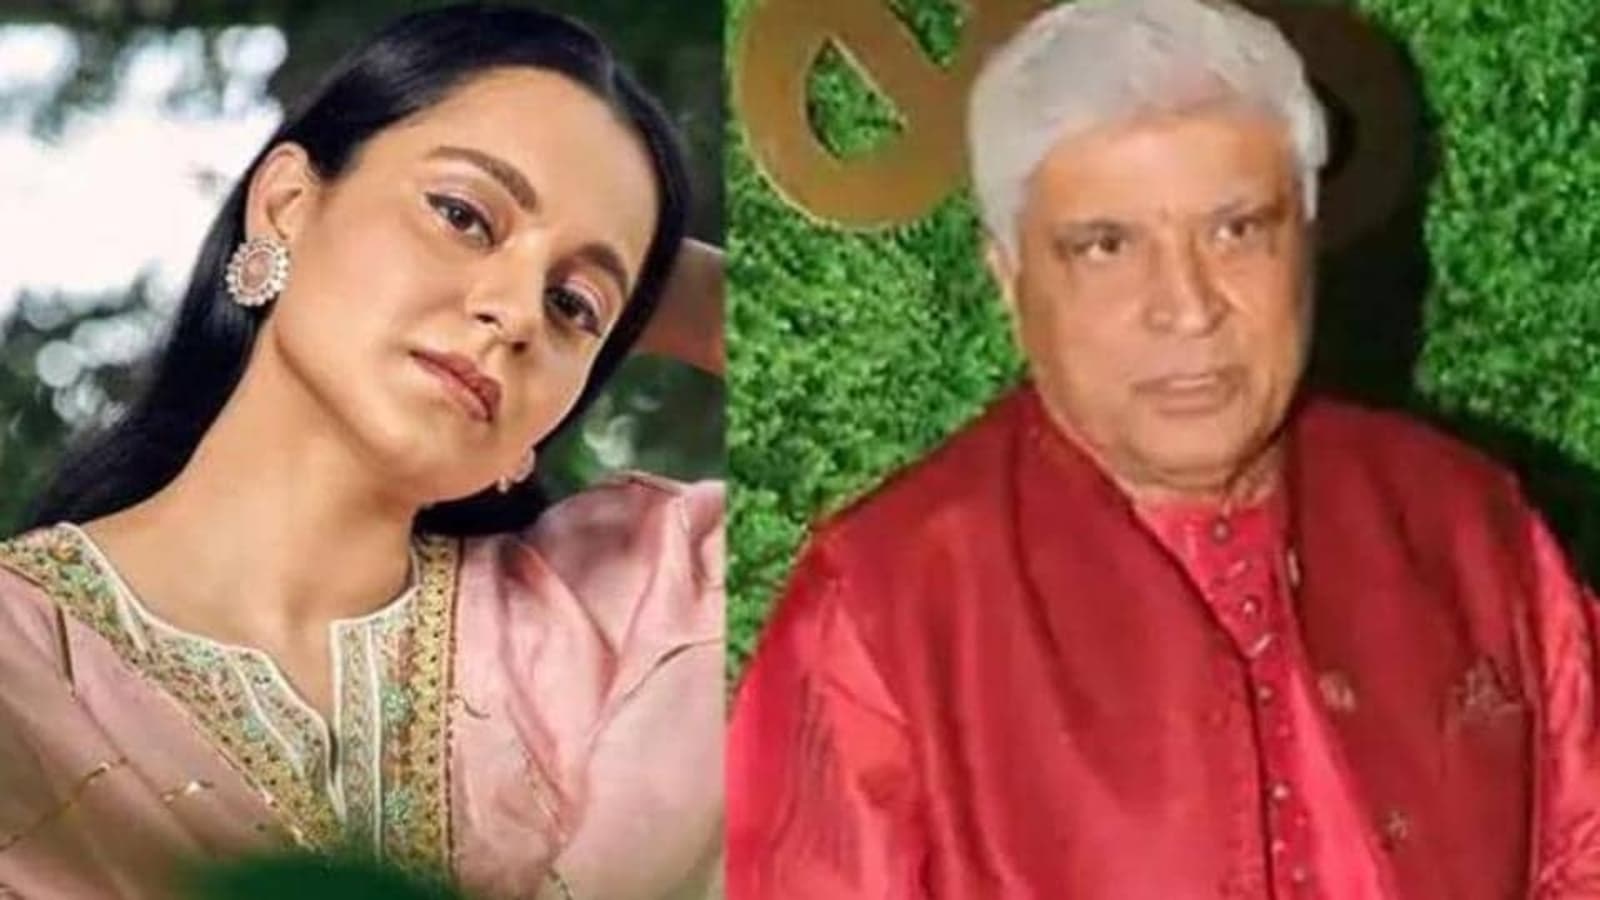 Kangana Ranaut requests Mumbai court to record her sister Rangoli Chandel’s statement in Javed Akhtar defamation case